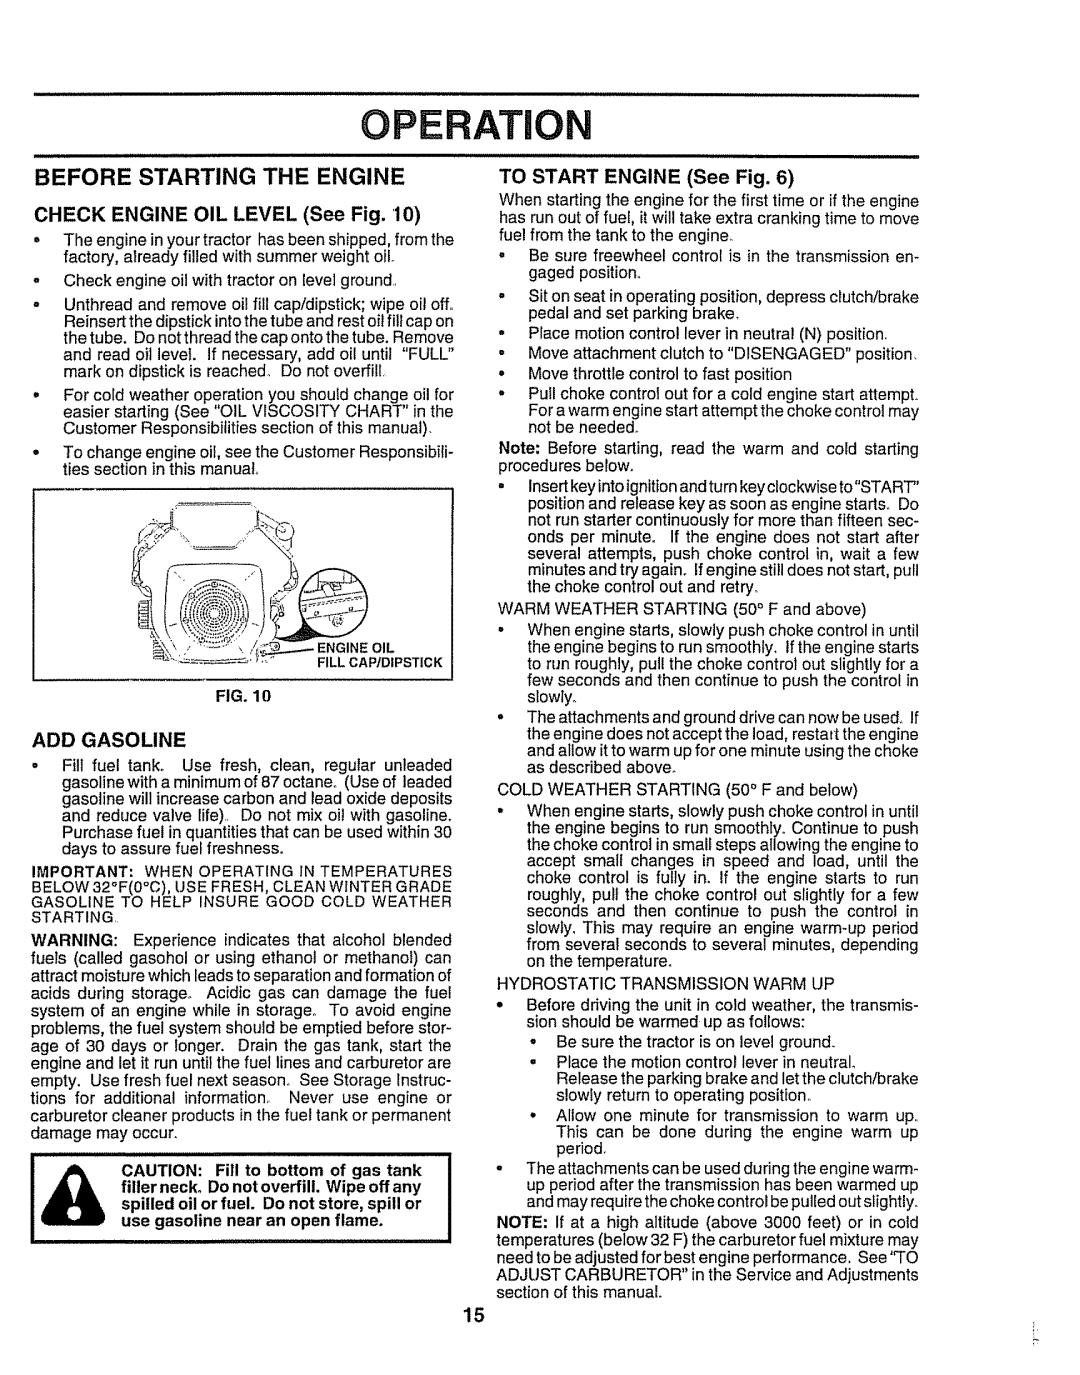 Craftsman 917.258911 owner manual O Eration, Before Starting The Engine, CHECK ENGINE OIL LEVEL See Fig, Add Gasoline 